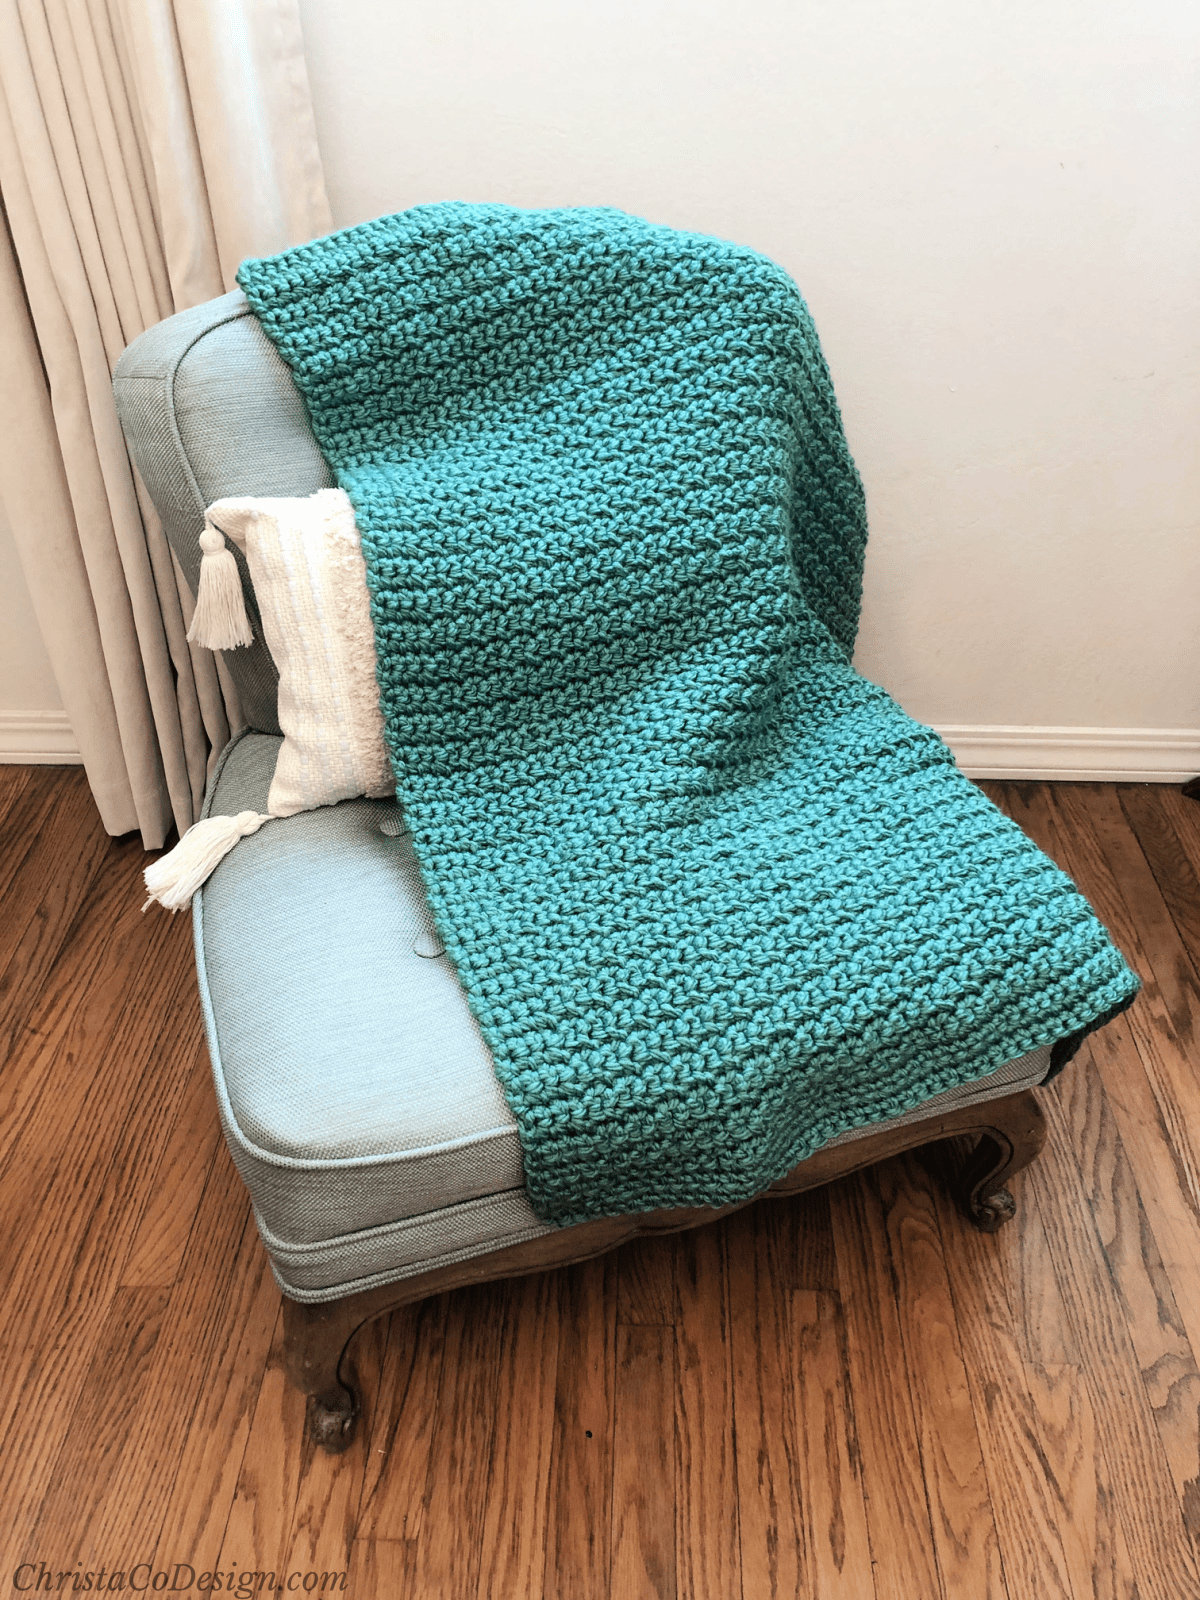 Chunky green crochet blanket draped on vintage blue chair in room with wood floor.